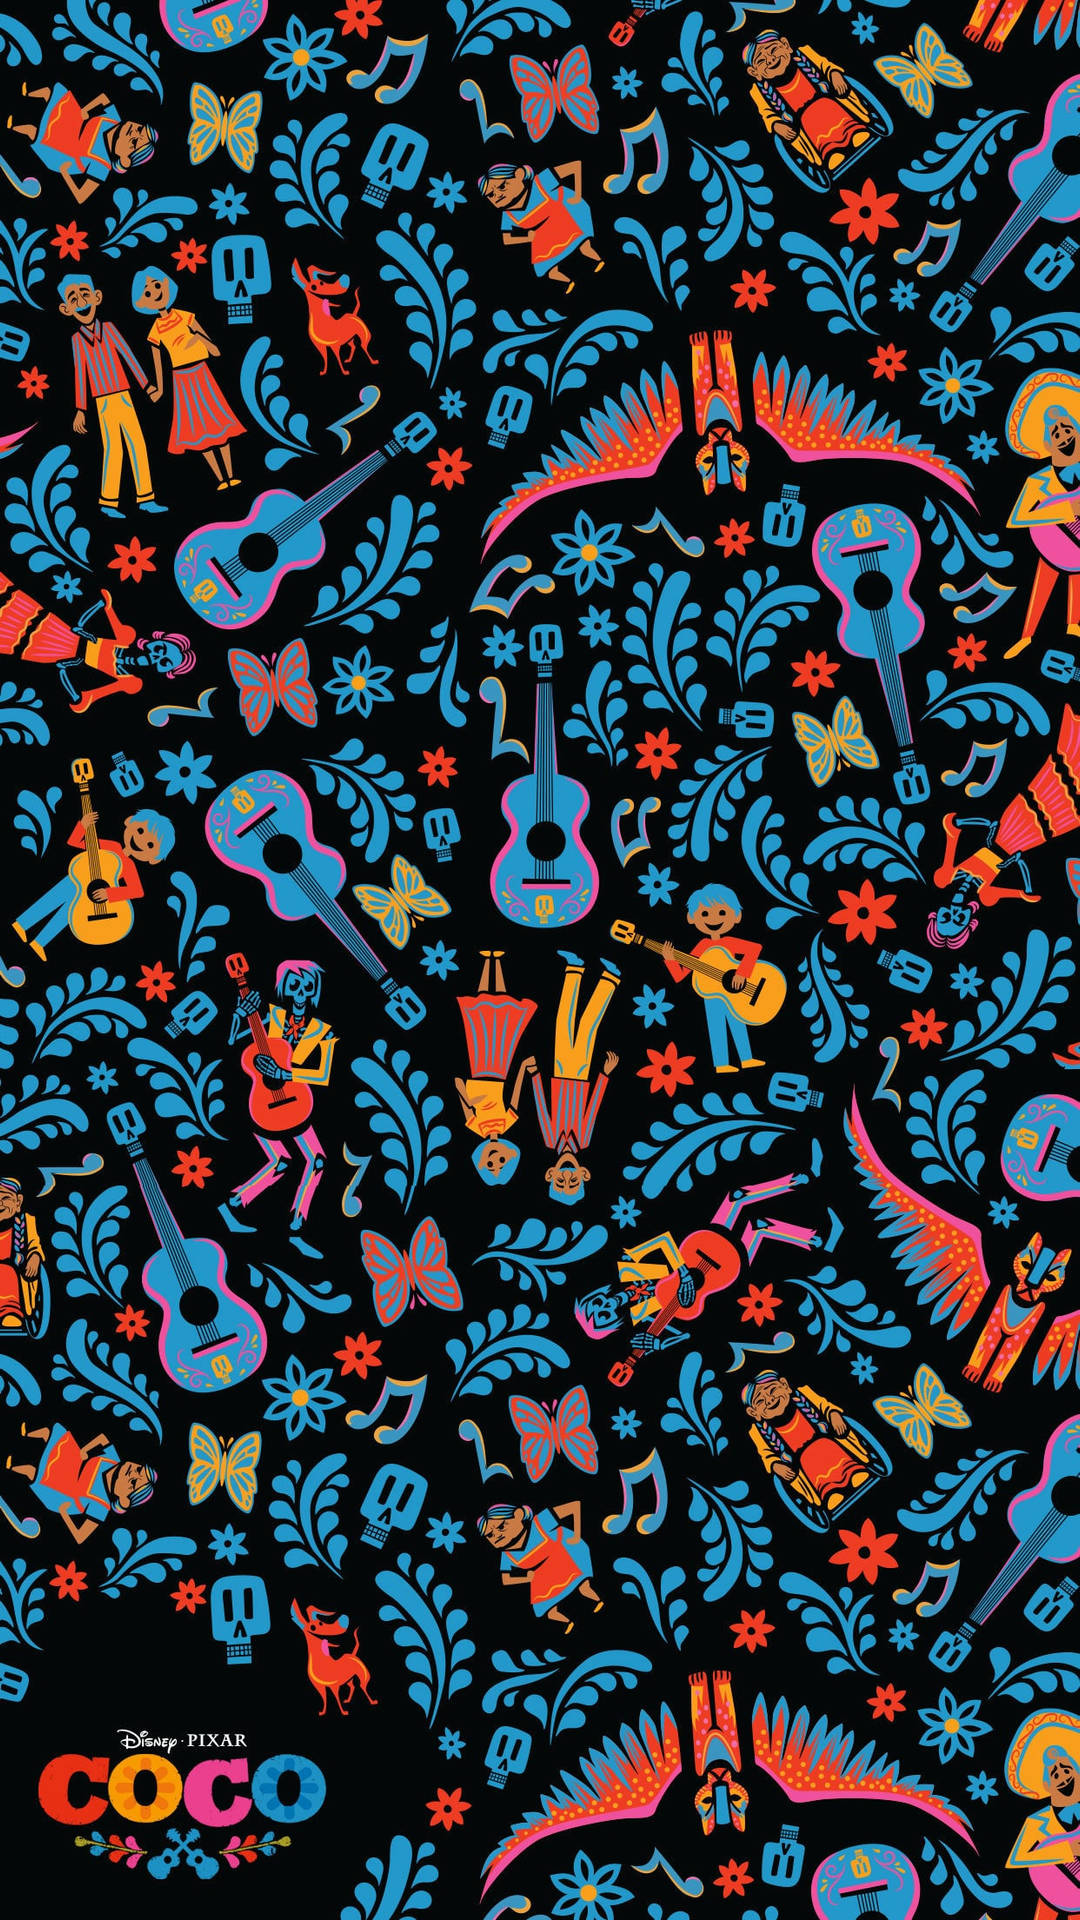 A colorful, patterned design with characters, maracas, guitars, musical notes, and skulls on a black background. In the lower left corner, the text reads, "Disney Pixar COCO".